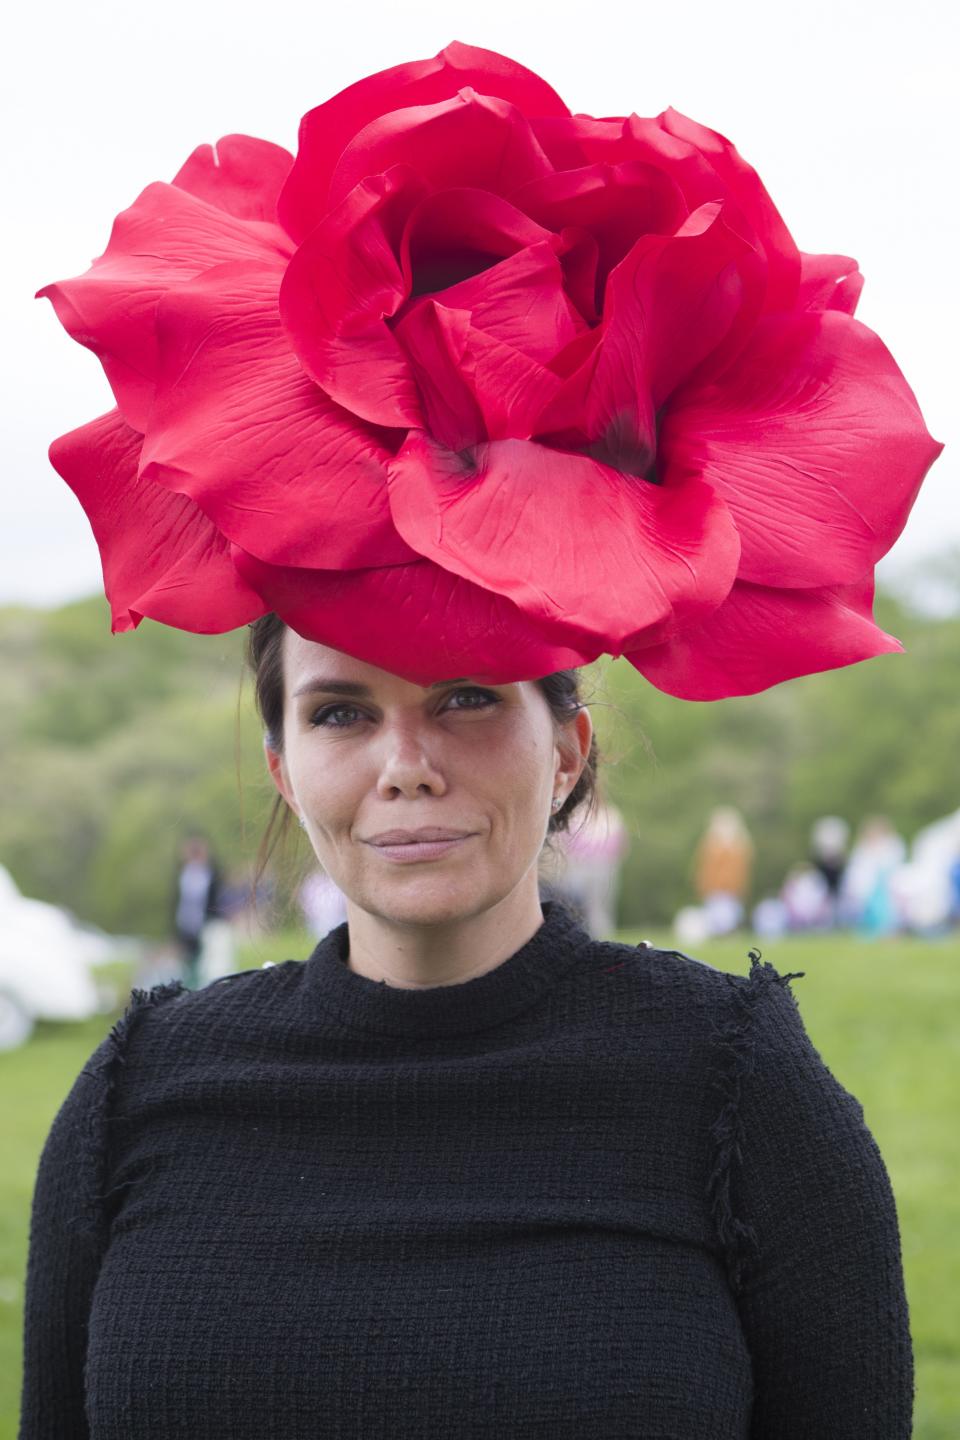 Extravagant hats are a staple at Winterthur's annual Point-to-Point.